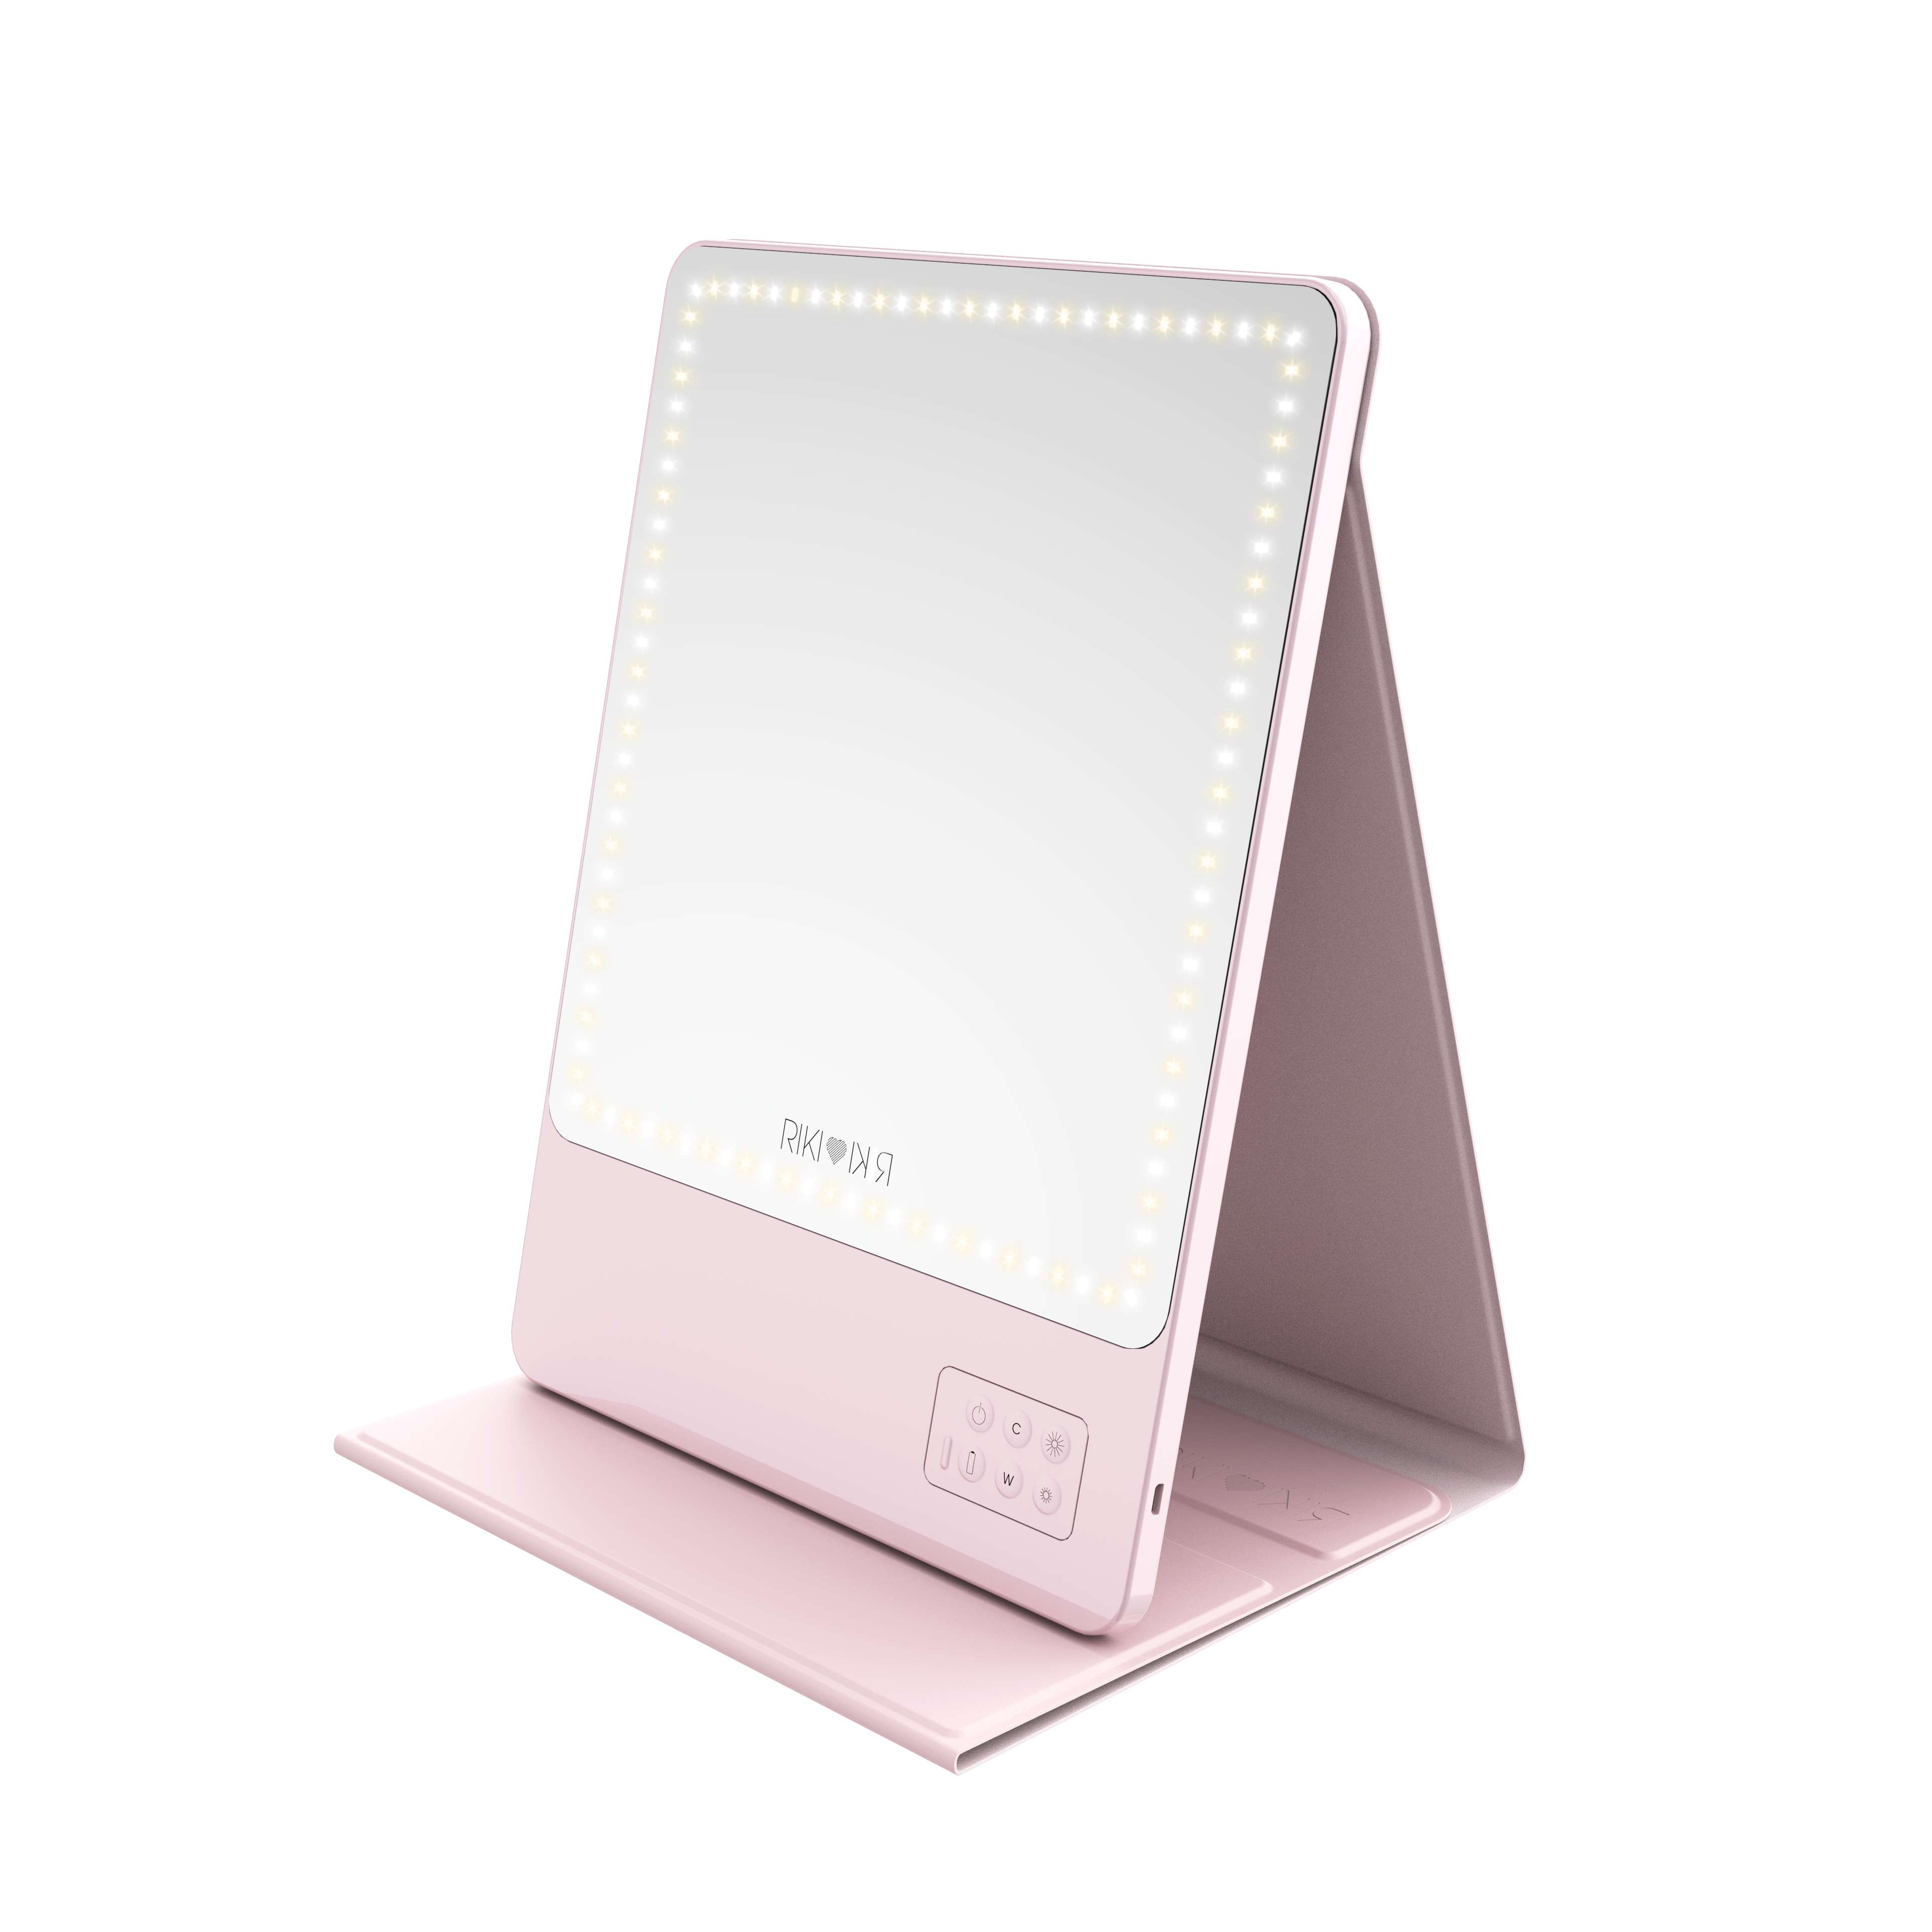 RIKI SKINNY ECO Glam On-the-Glow Set with White and Pink Flip Case, stylish and versatile